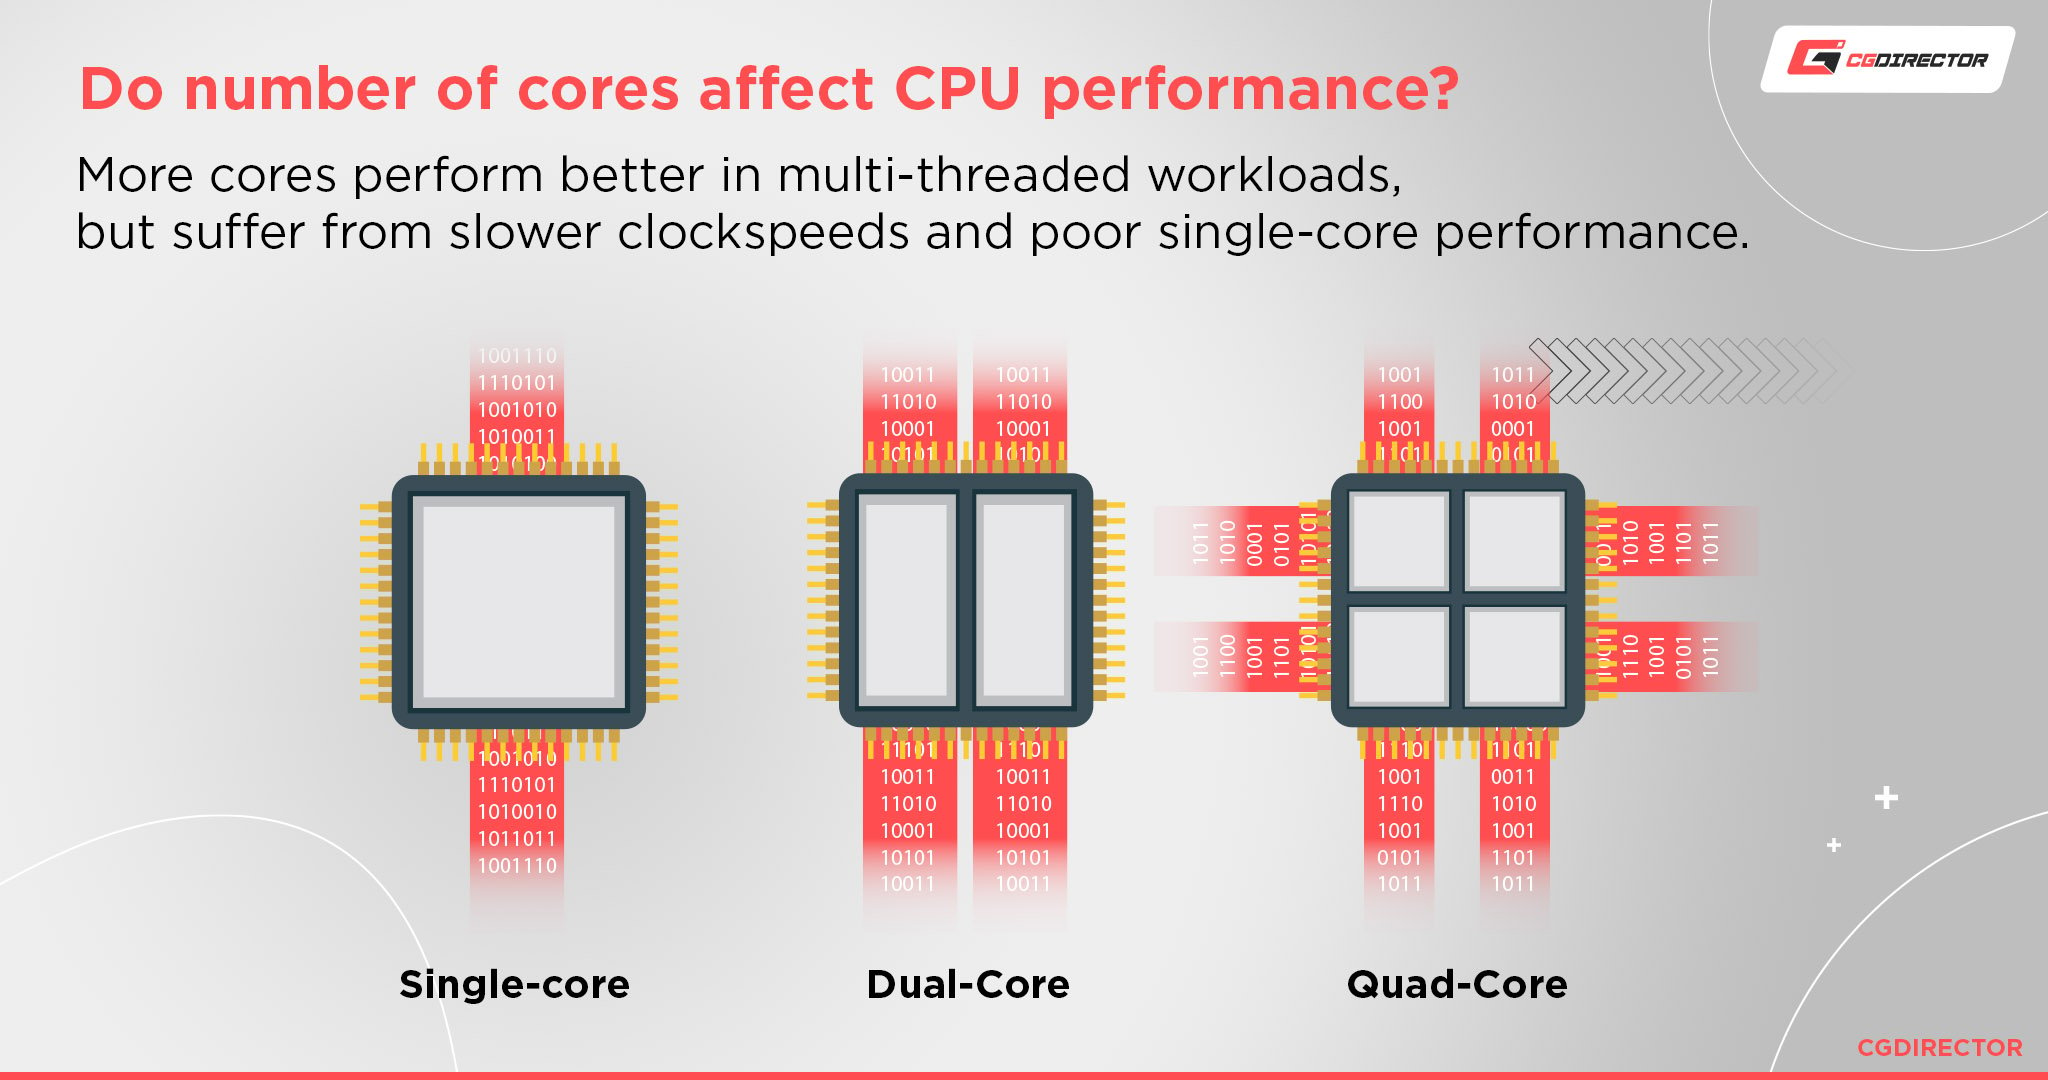 How do number of cores affect CPU performance